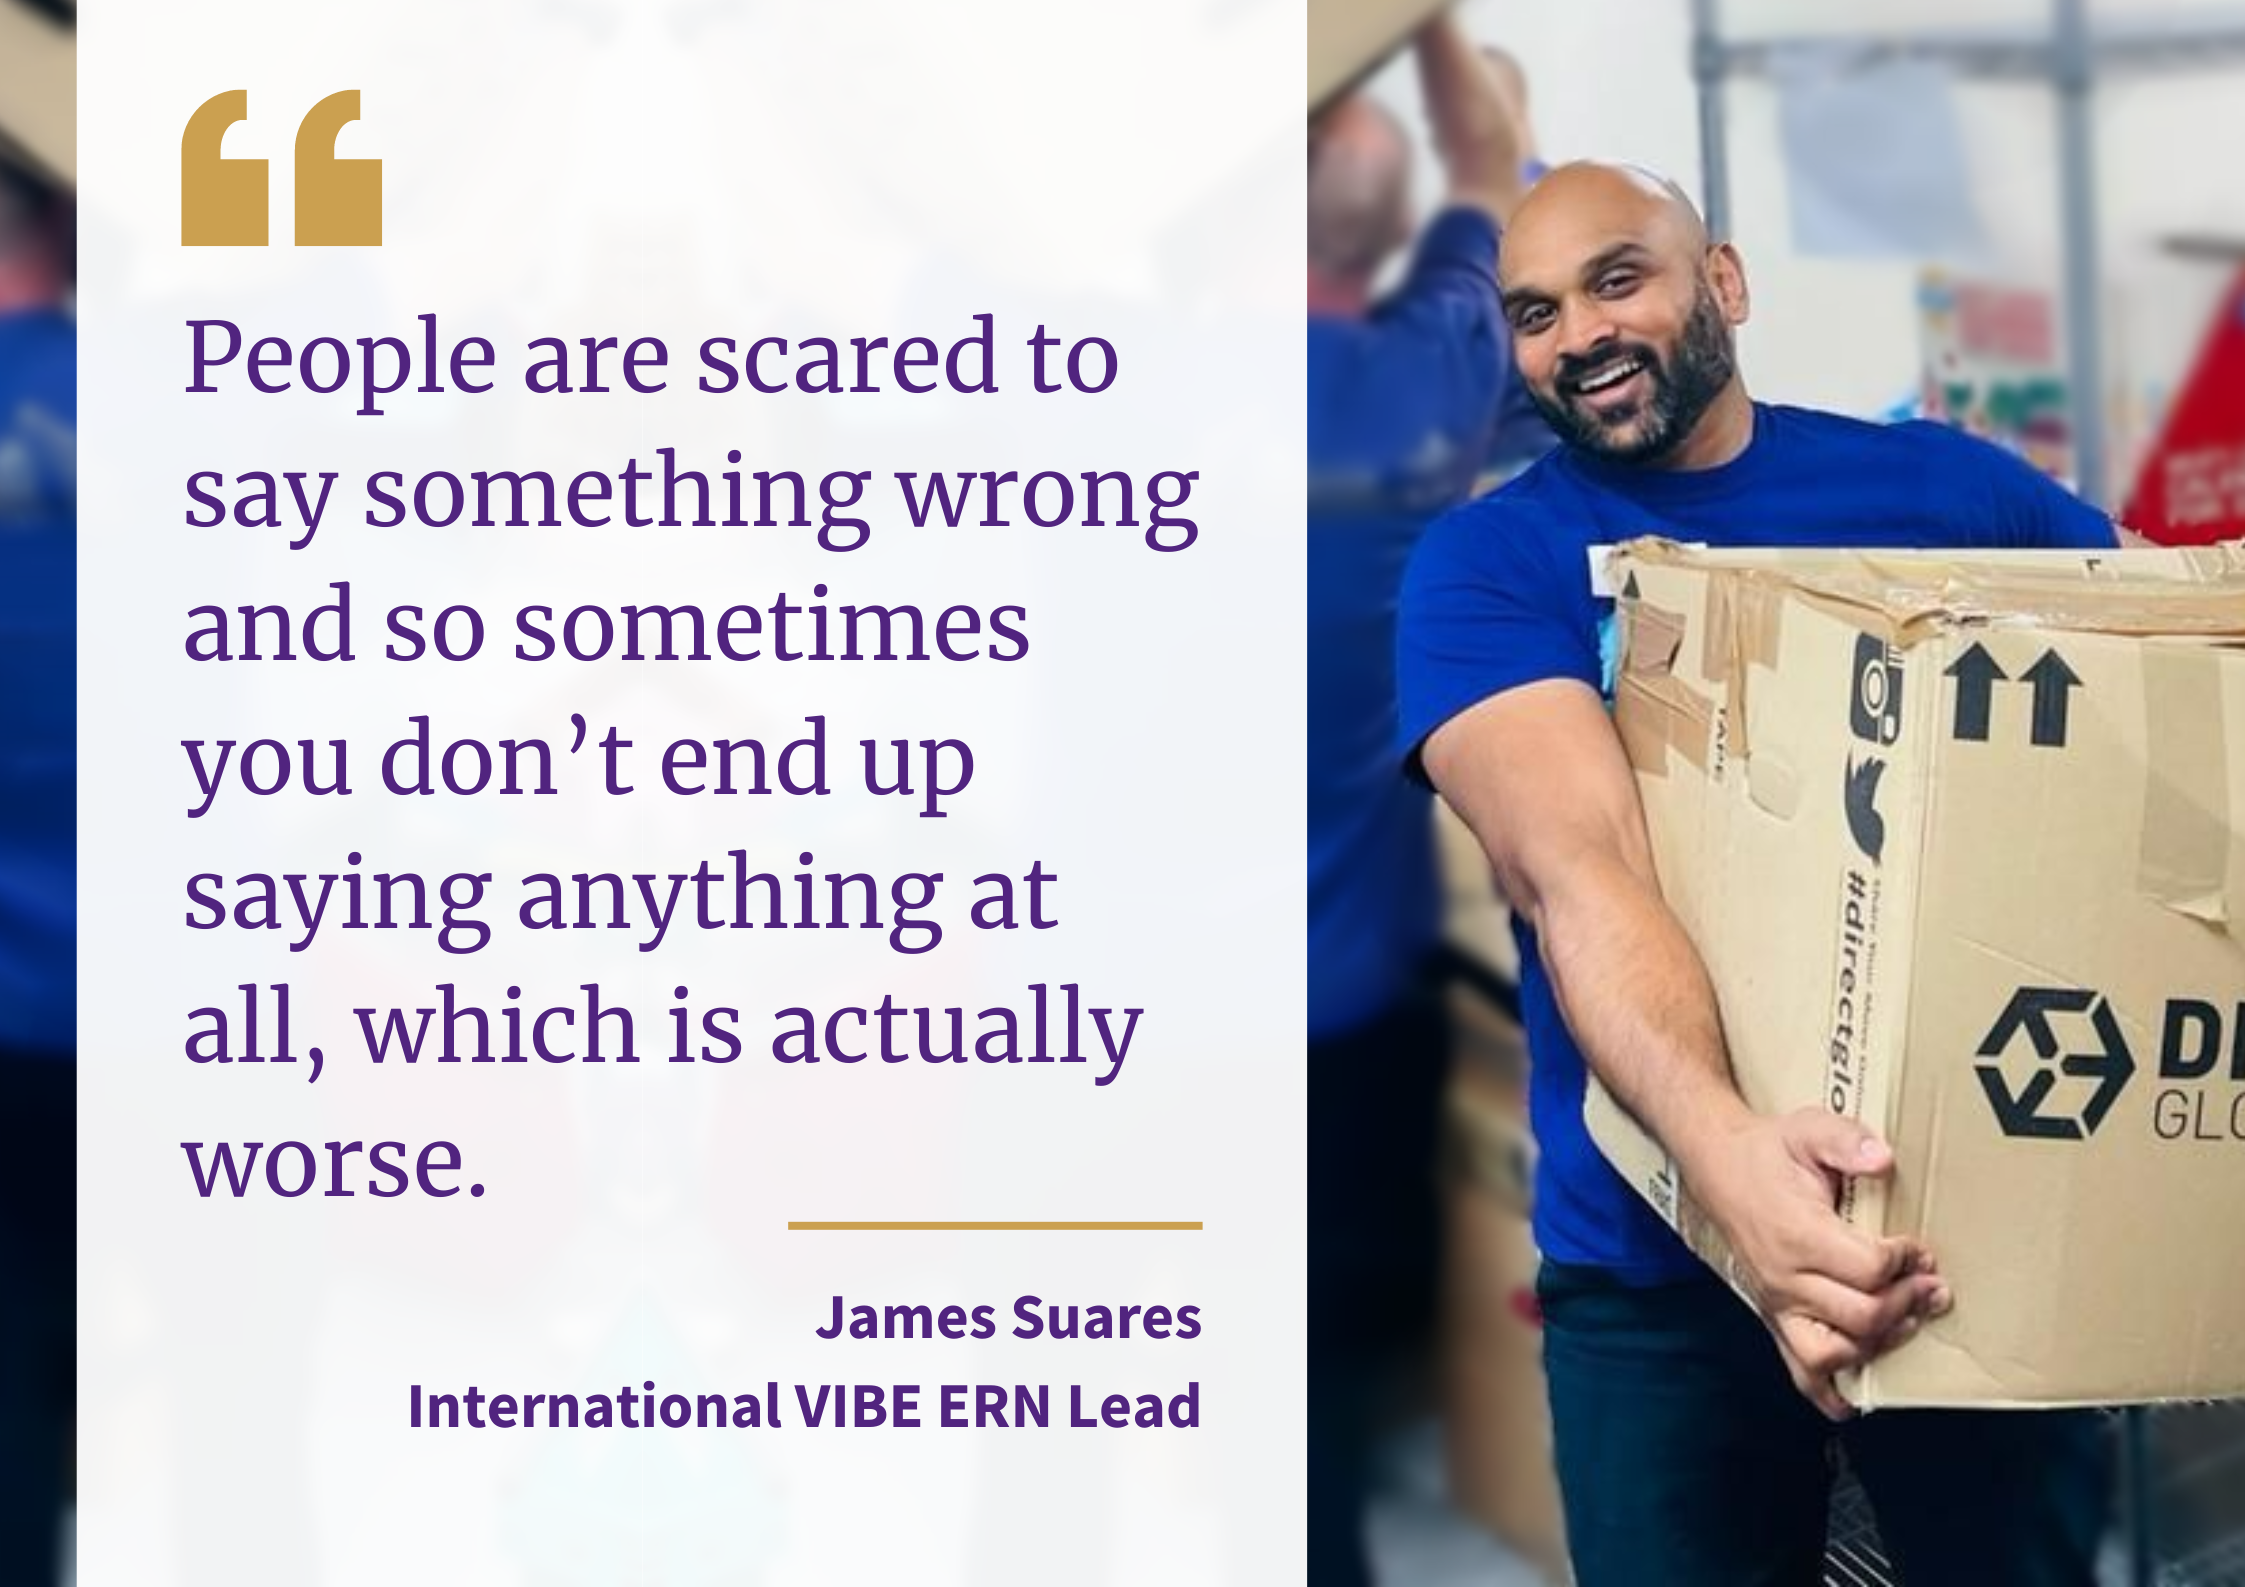 An image of James Suares with a quote that says "People are scared to say something wrong and so sometimes you don't end up saying anything at all, which is actually worse."